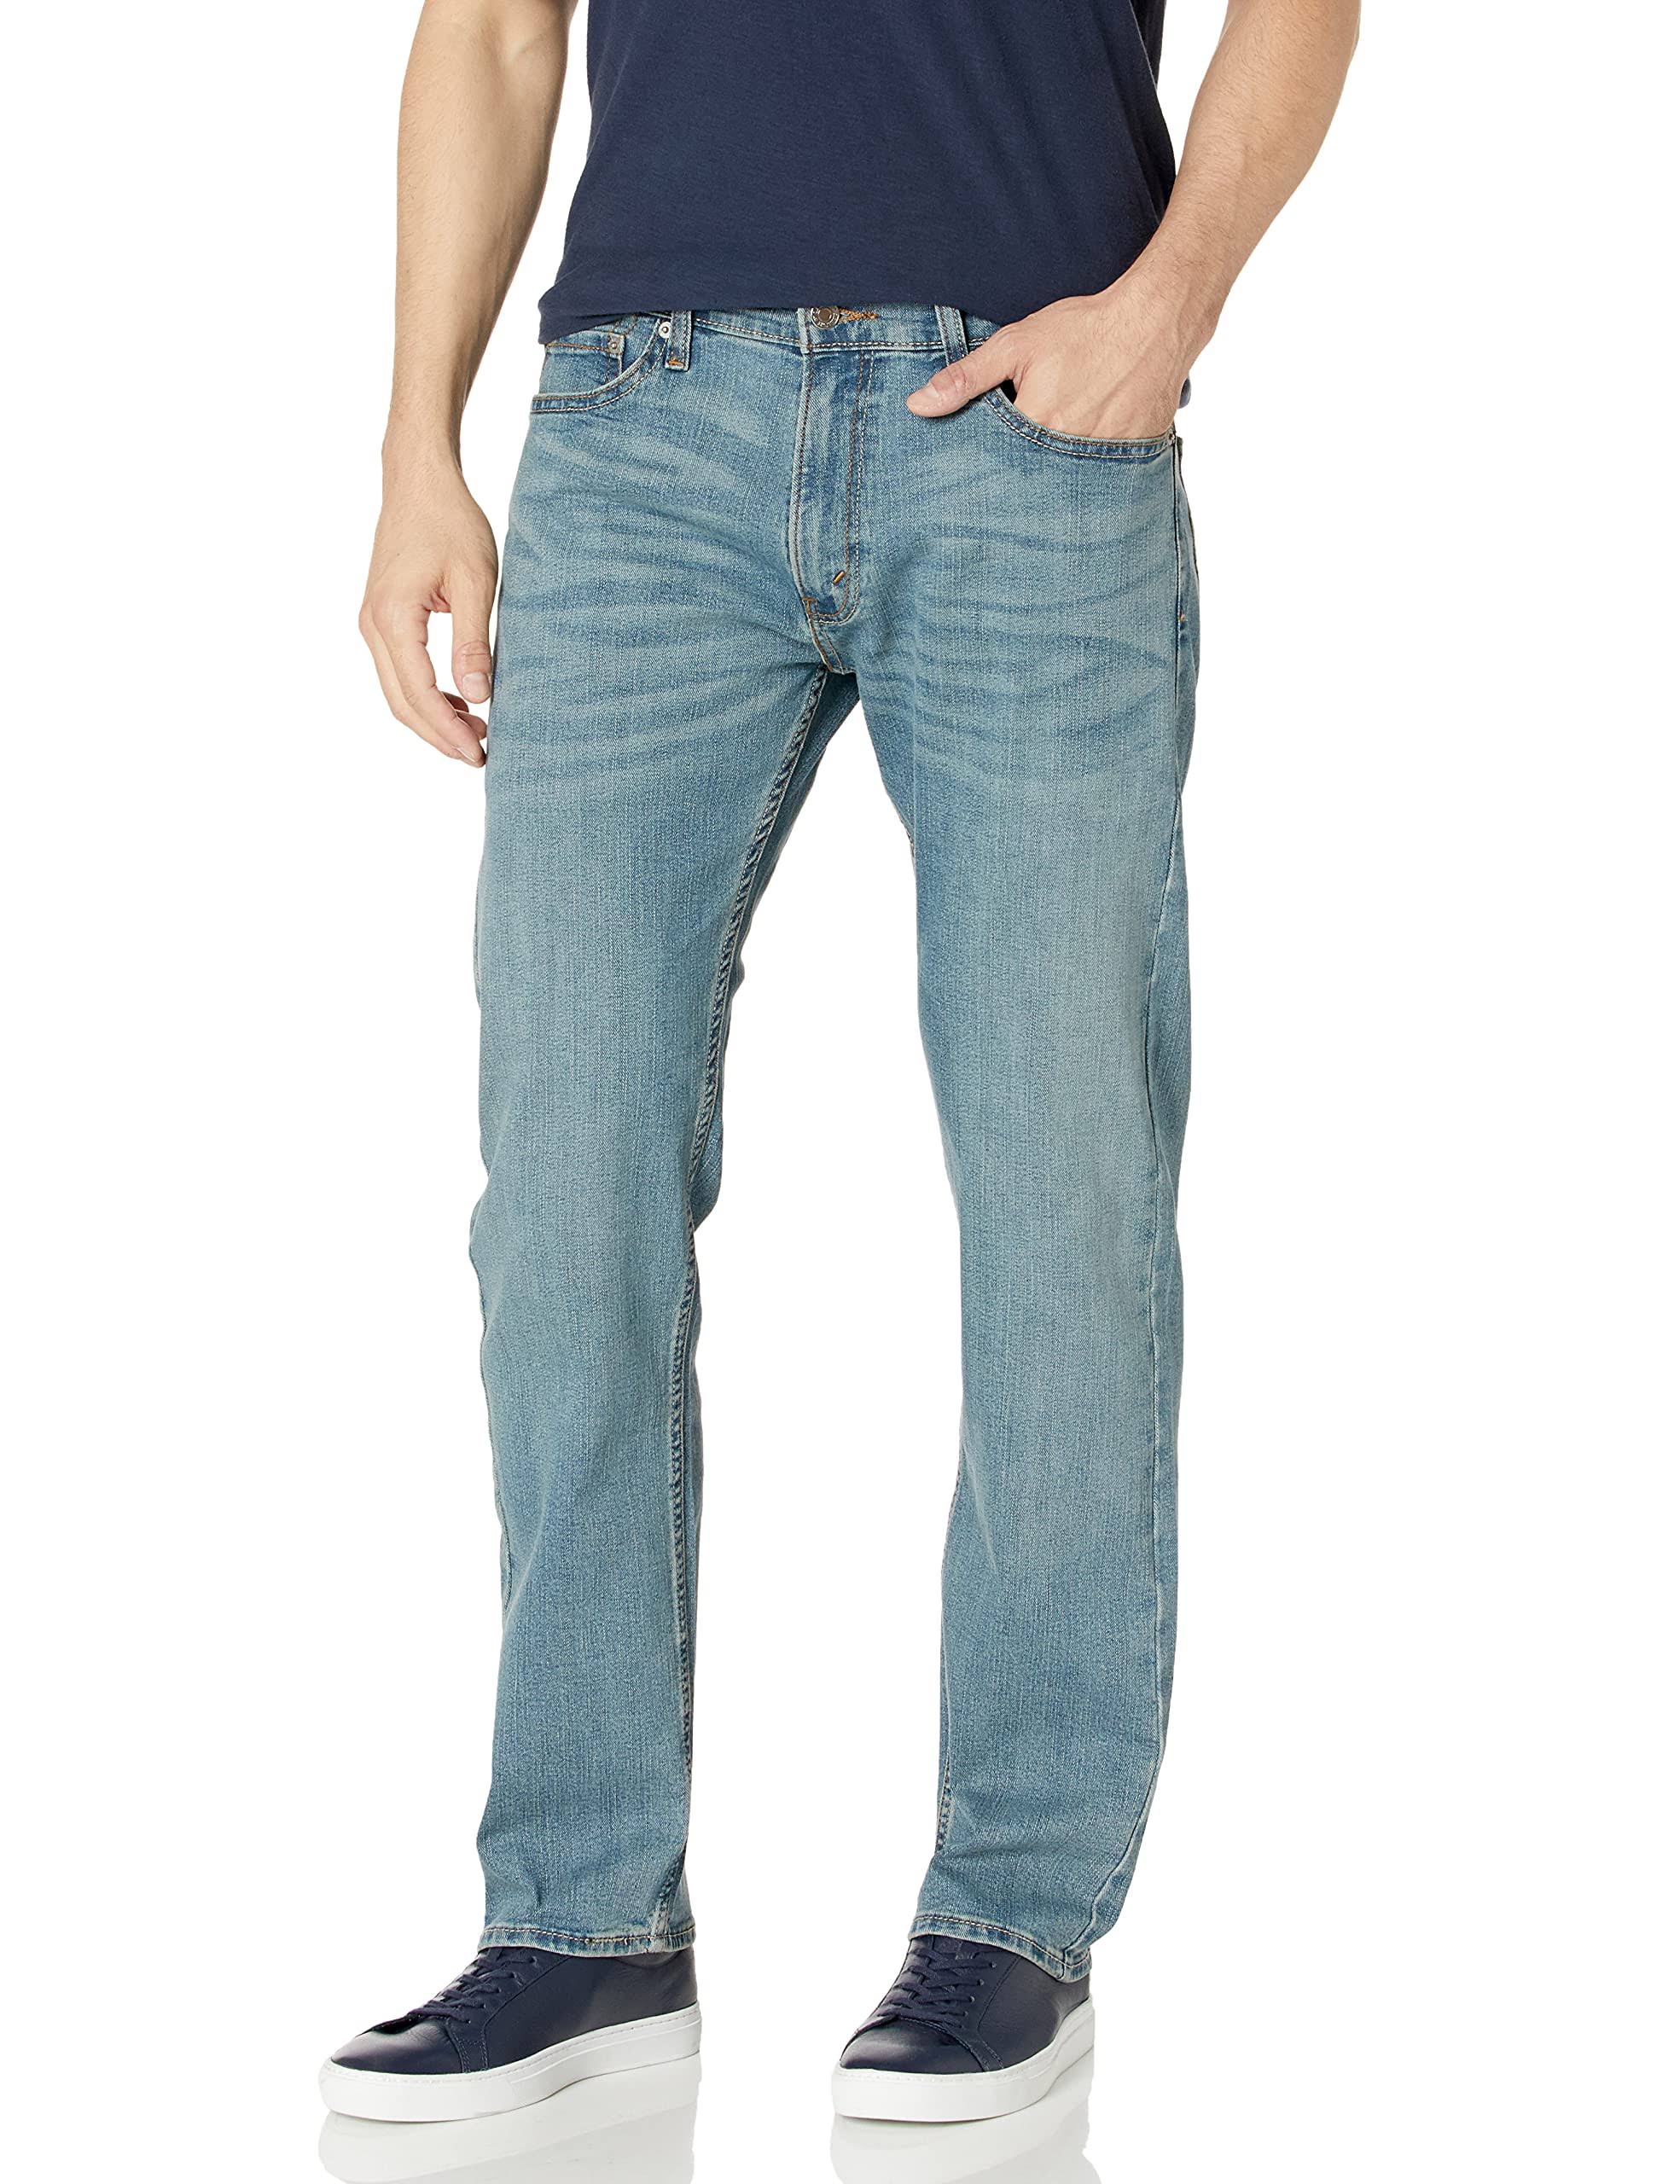 Signature by Levi Strauss u0026 Co. Gold Label Men's Relaxed Fit Flex ...